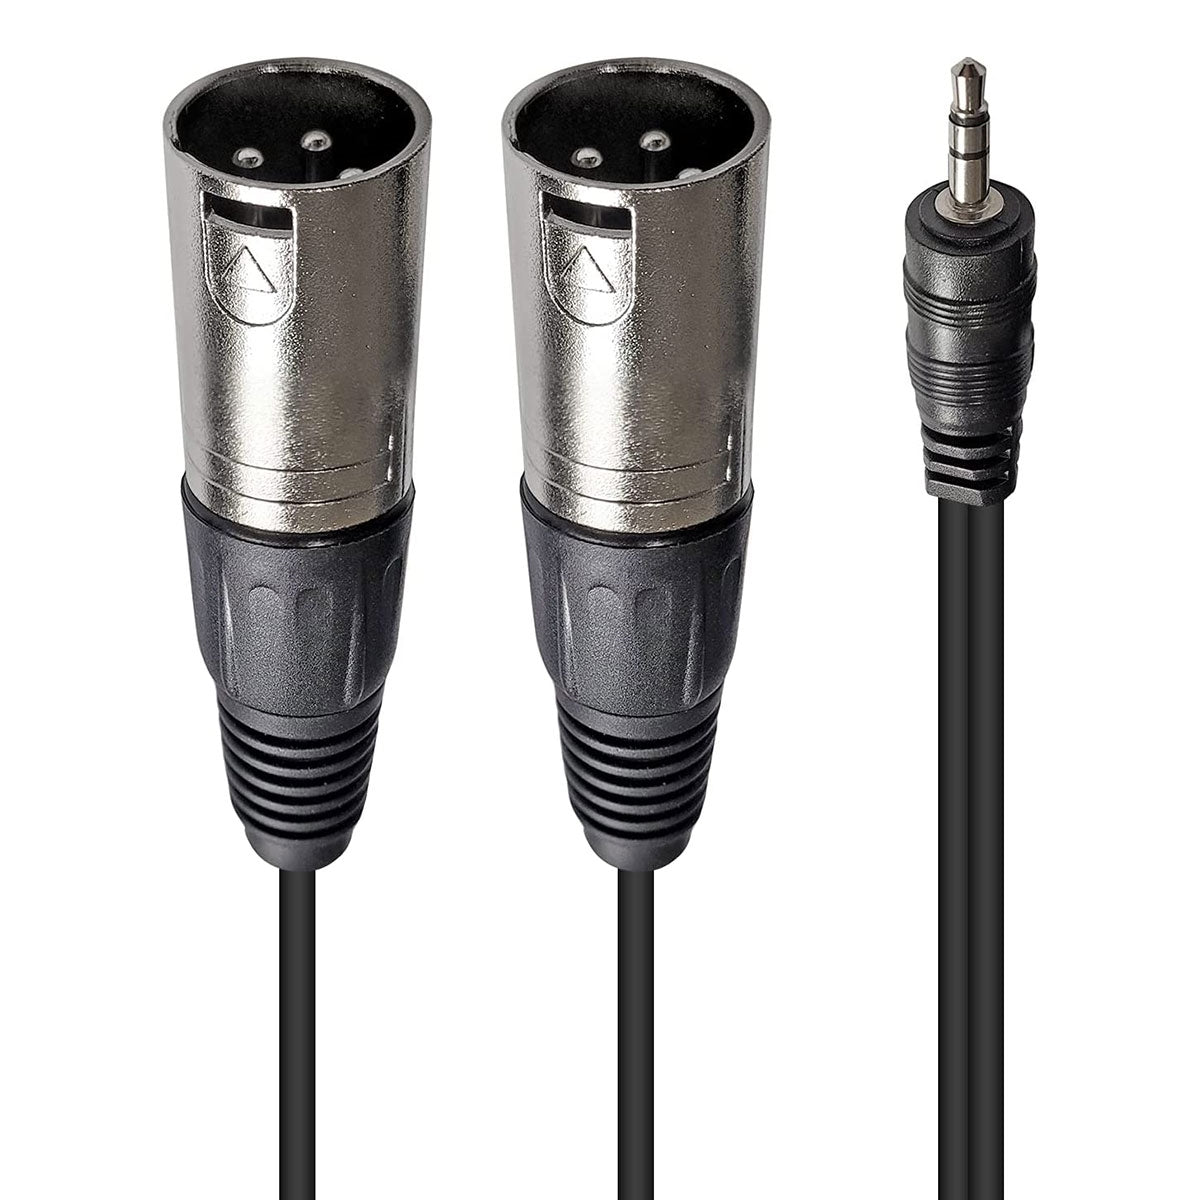 3.5 mm Mini Jack to 2x XLR male 3 pin adapter cable